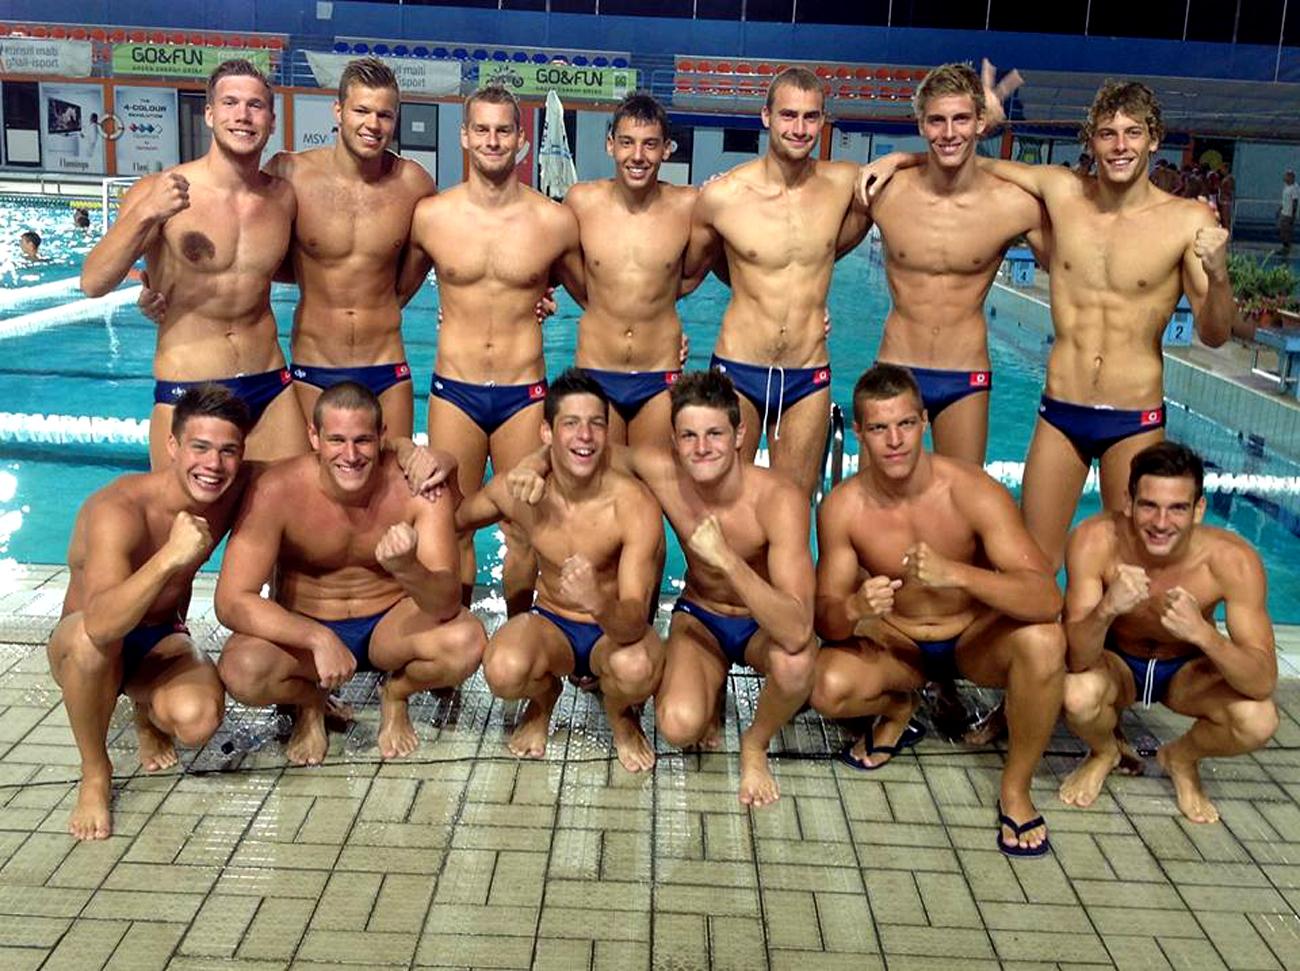 Water Polo: Defending World Champions Hungary Wipe Out Argentina 21-4